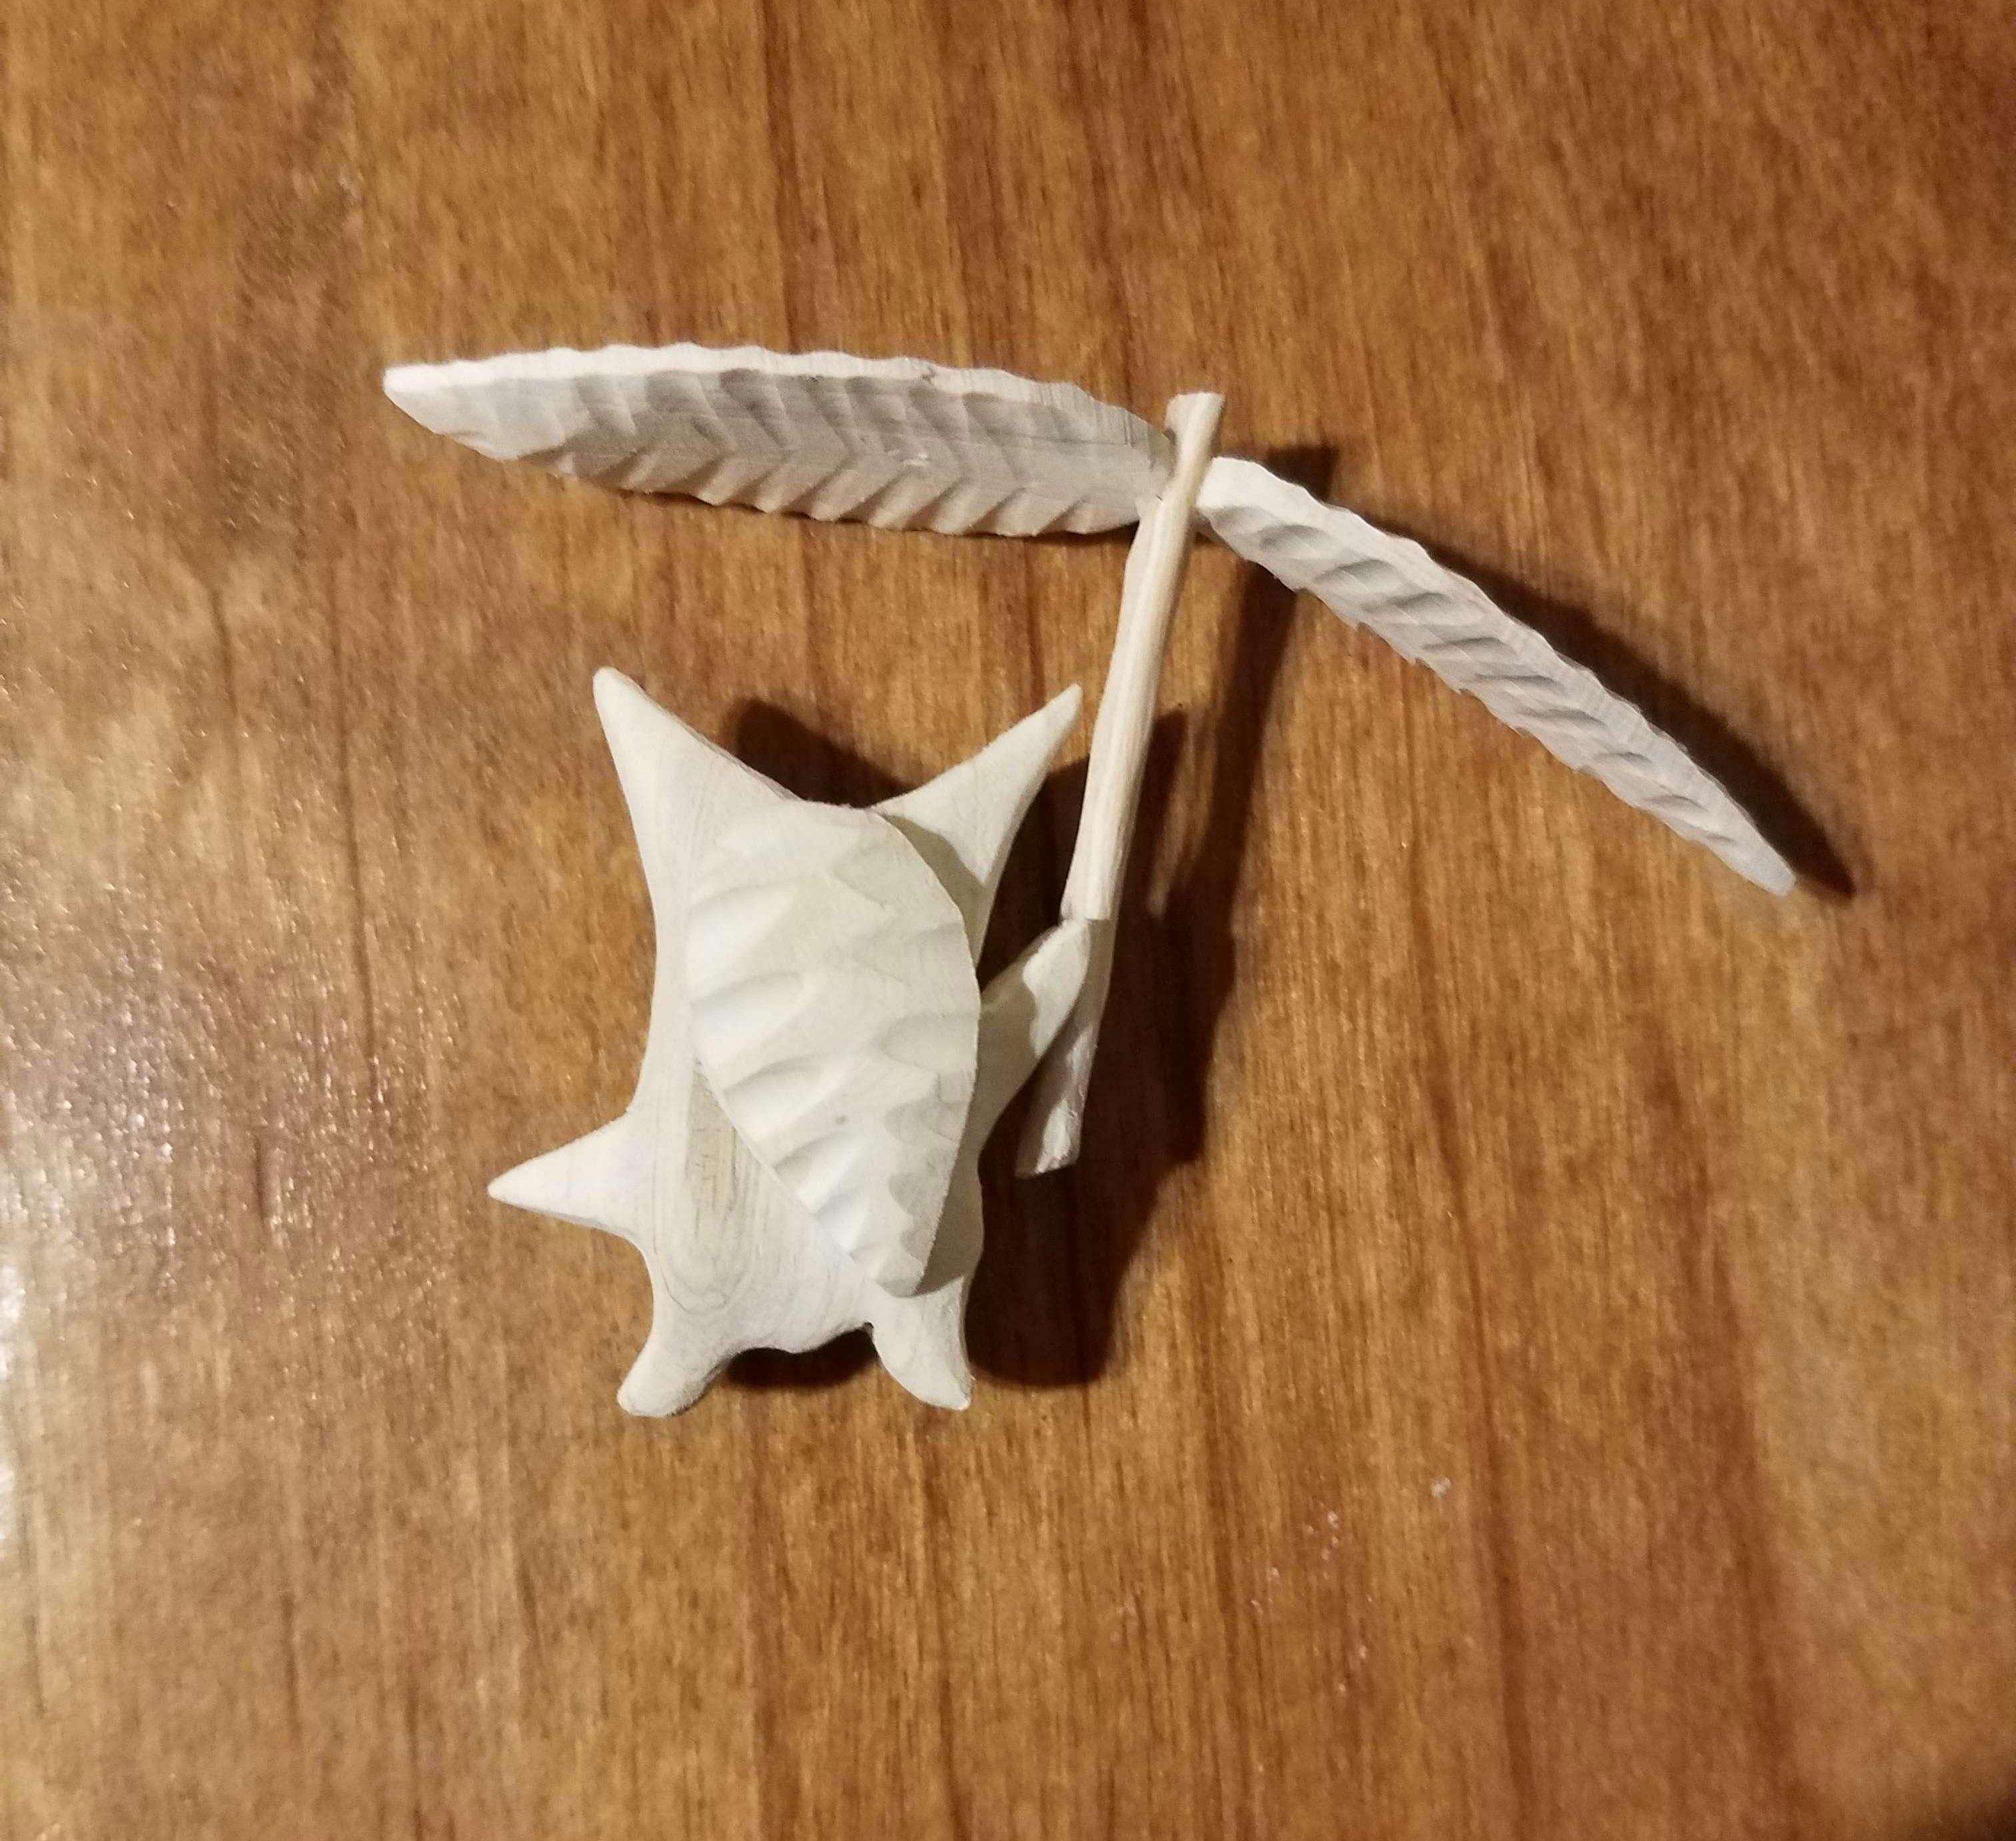 the unpainted korok with a propeller leaf